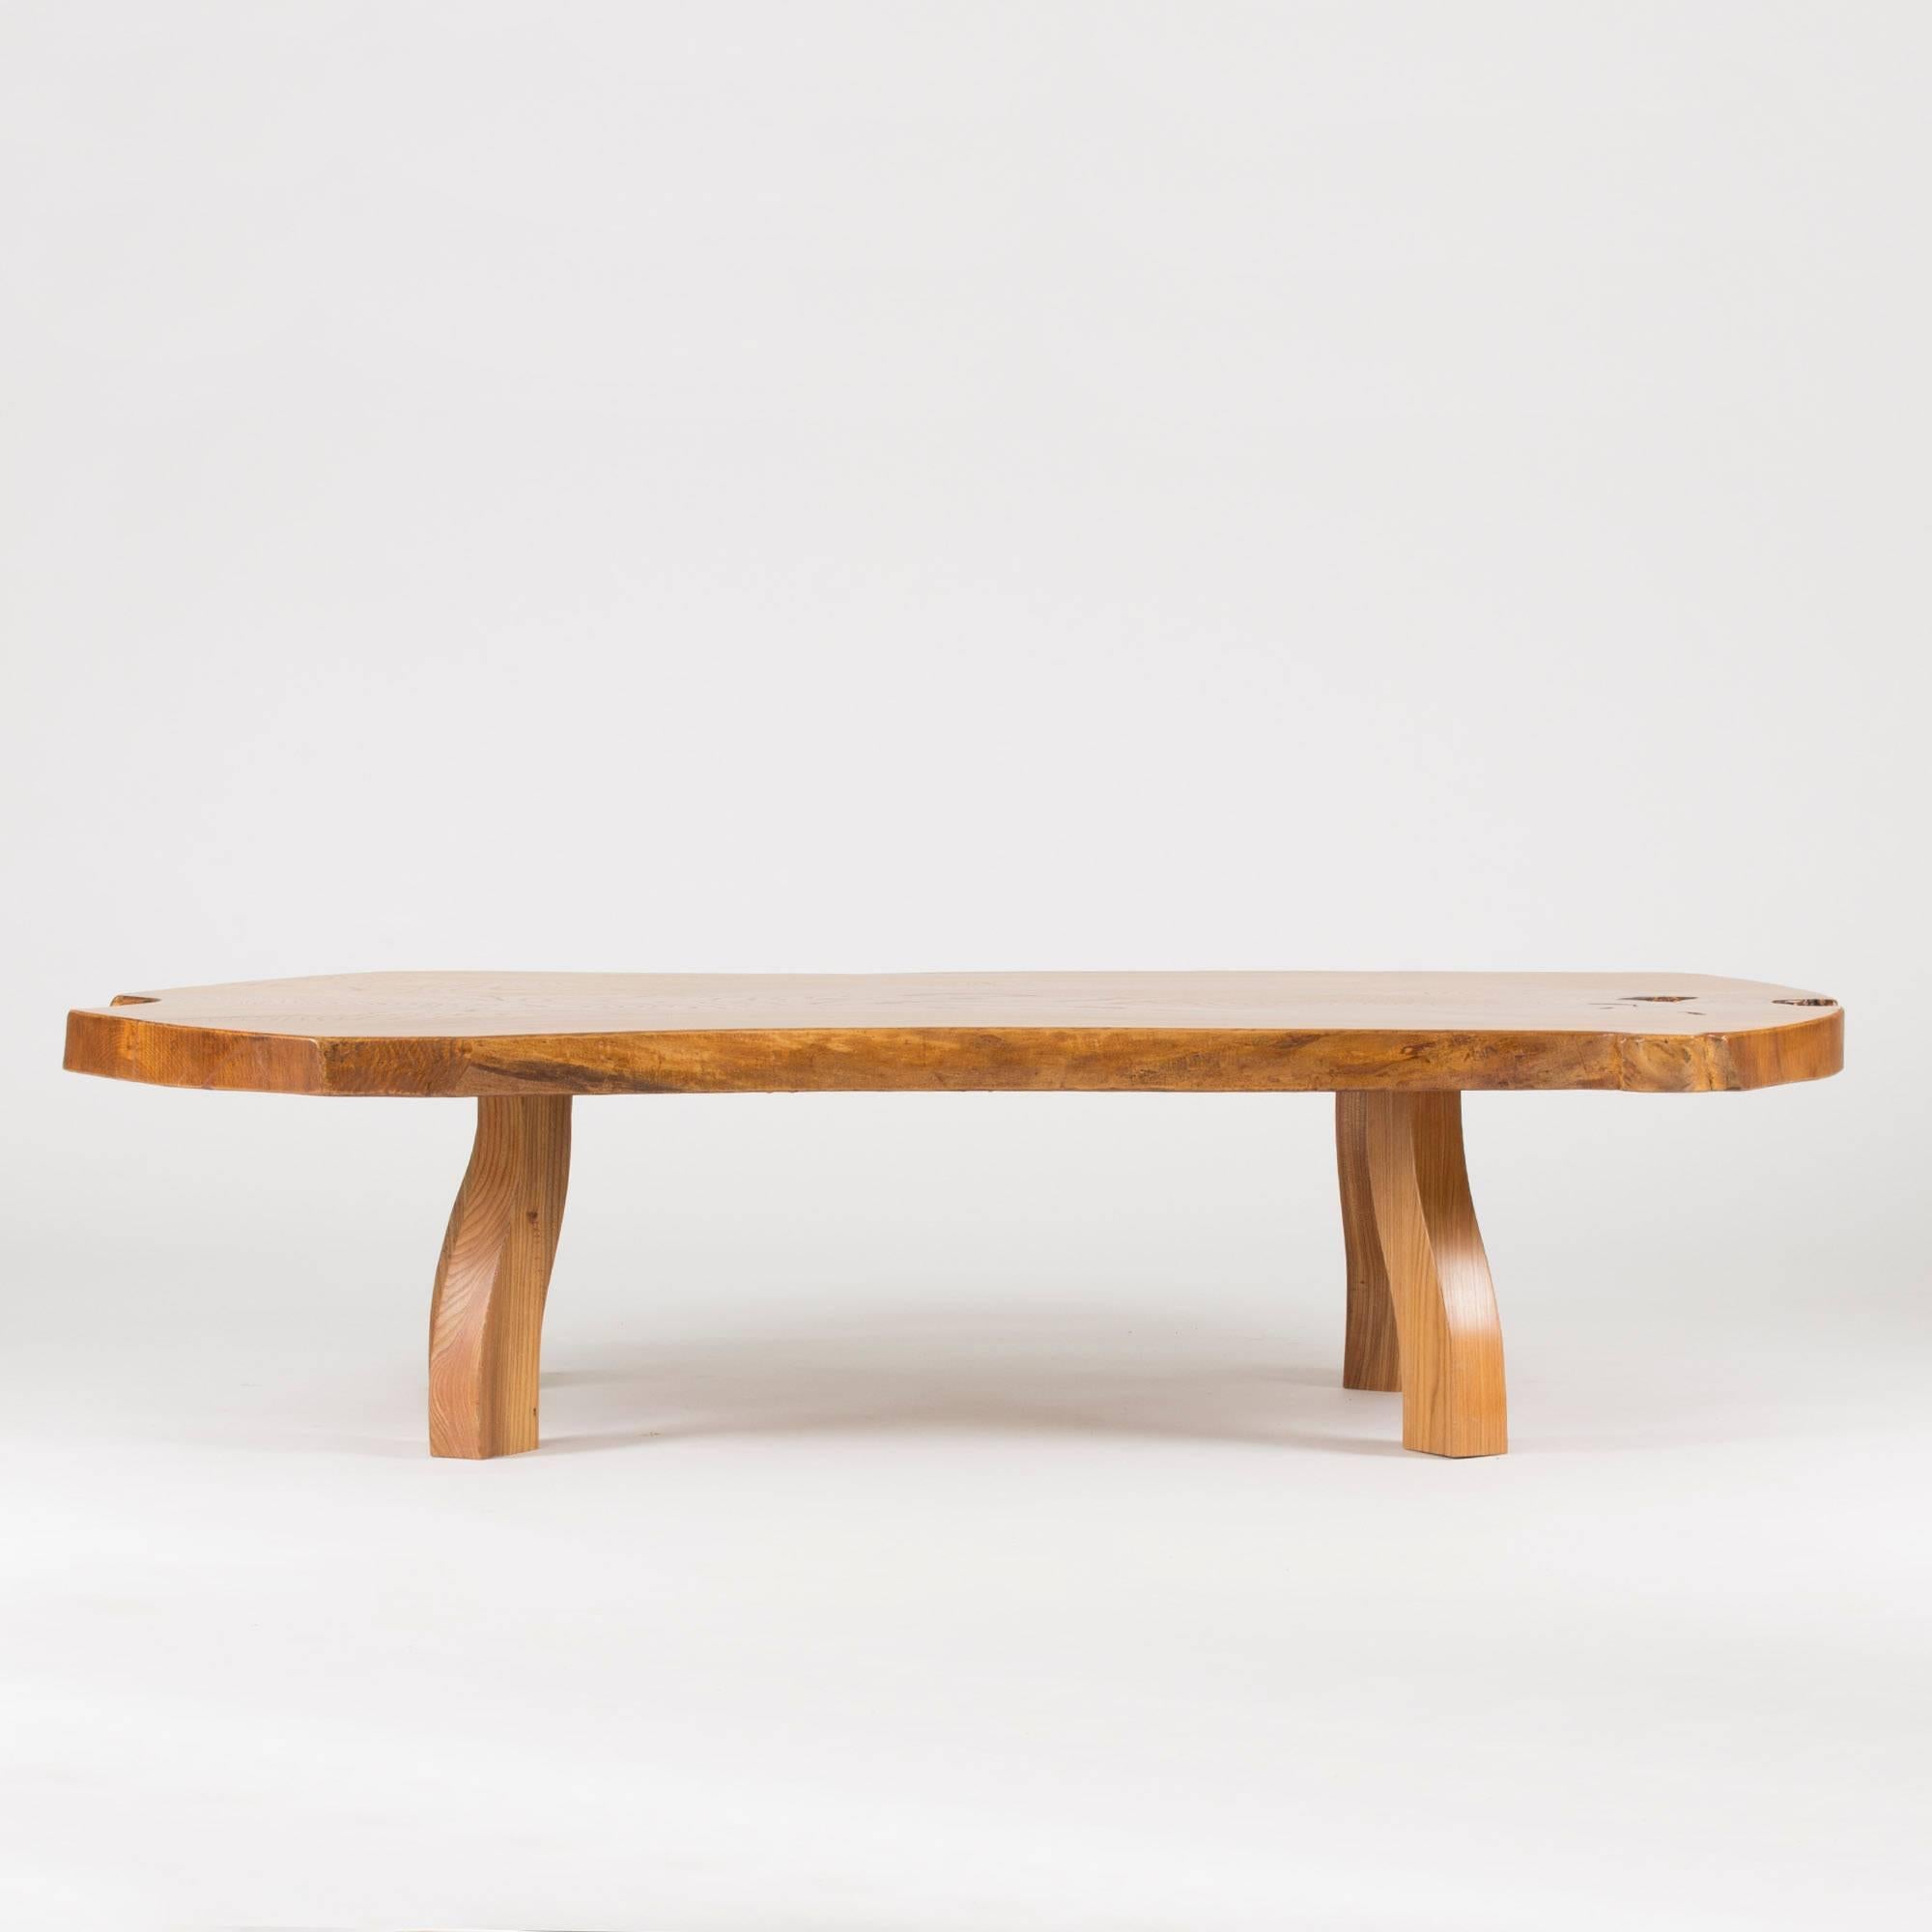 Amazing pine coffee table from C.A. Beijbom. Made from a large, thick pine slab with brutish, sculpted legs. Lively wood grain and accentuated knots at the far edges.